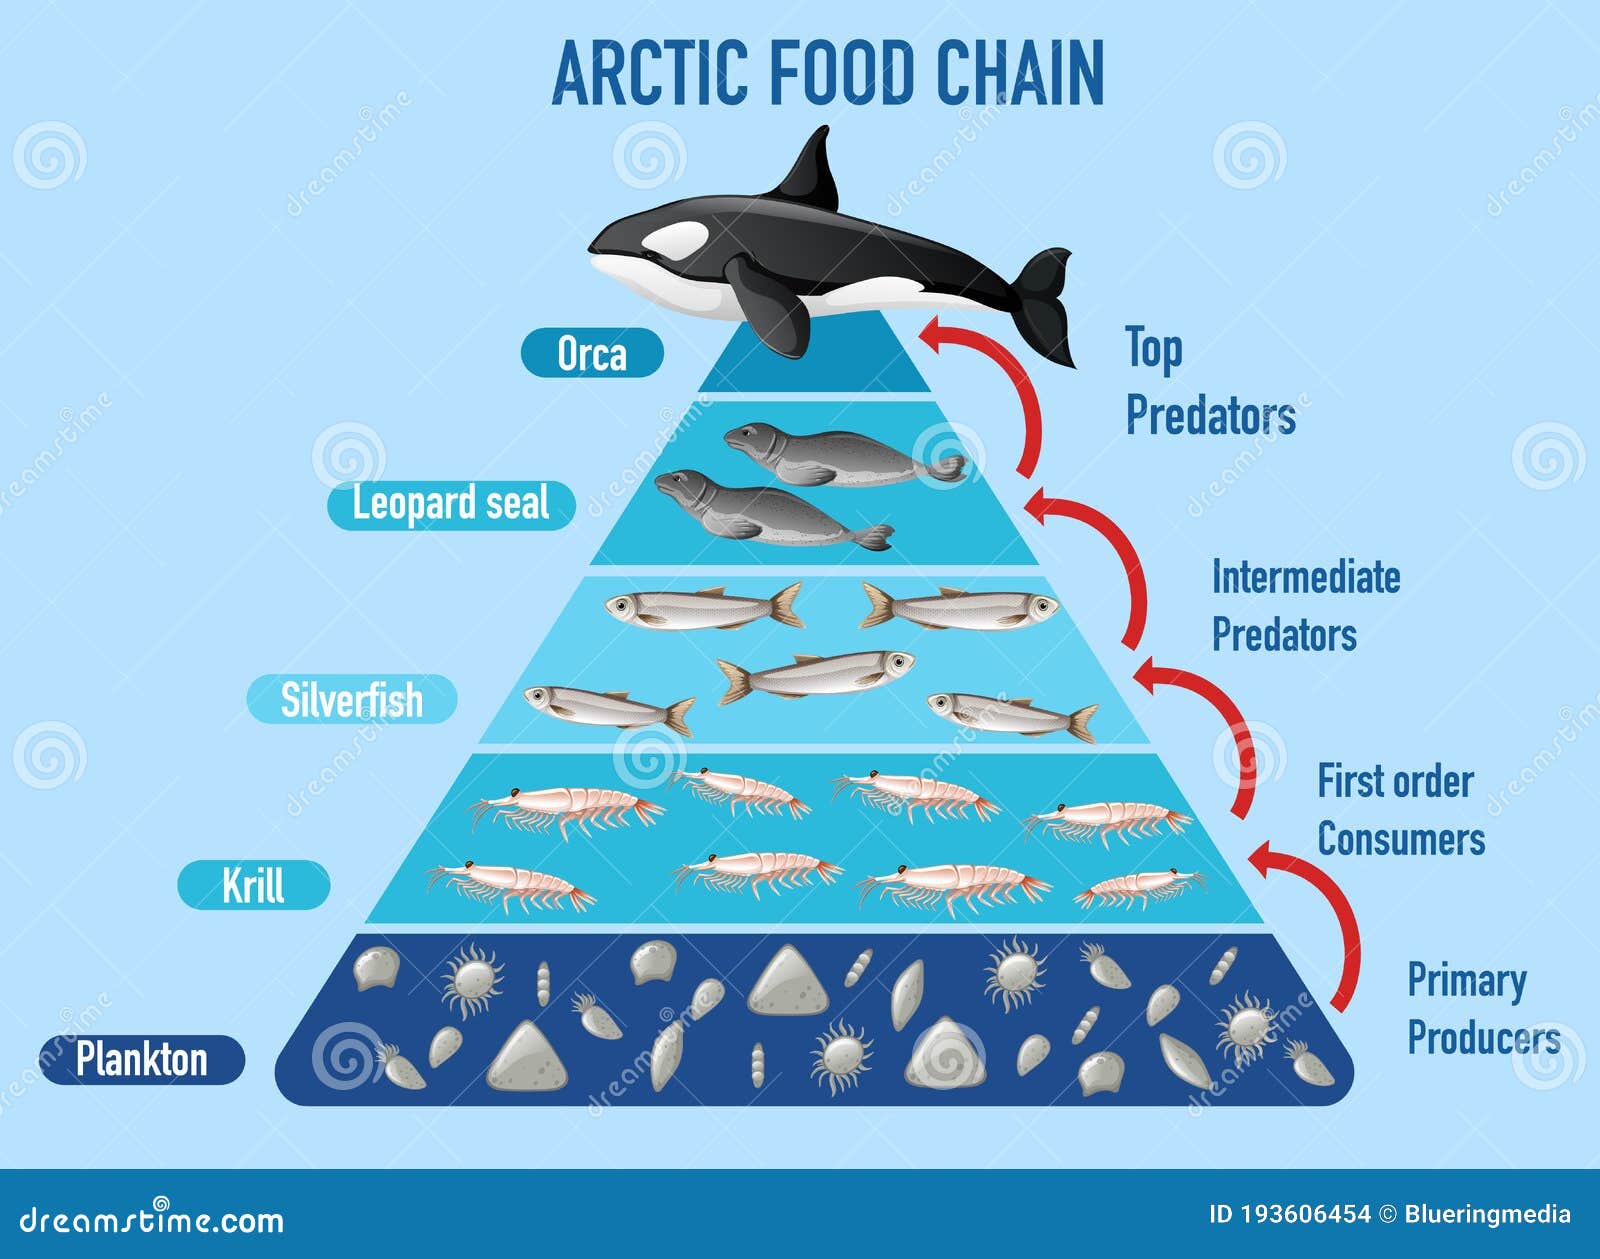 37+ Food Chain In The Ocean Example Background